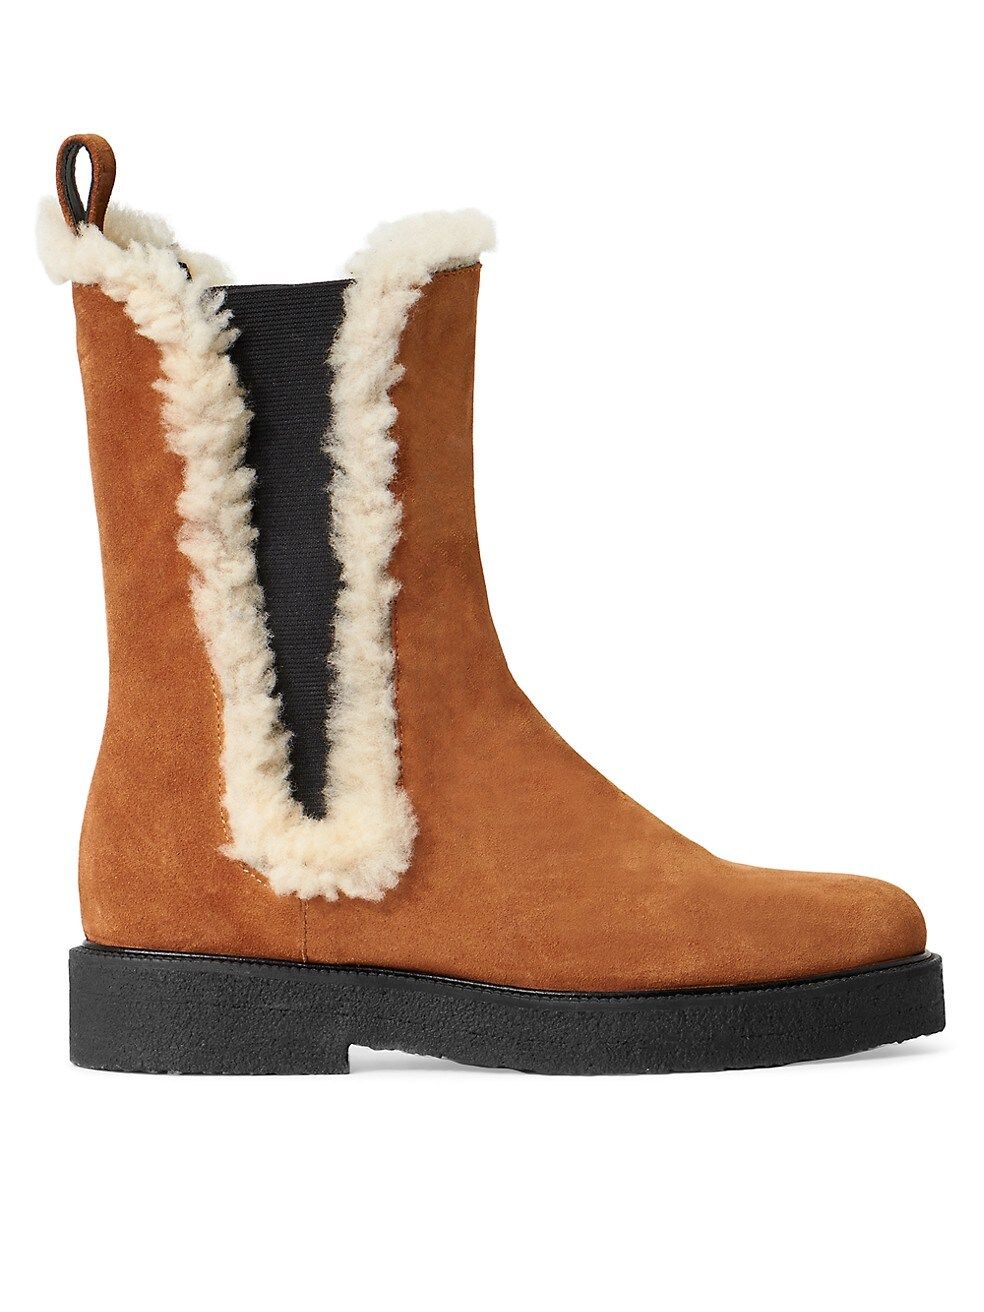 Palamino Shearling-Trimmed Leather Boots | Saks Fifth Avenue